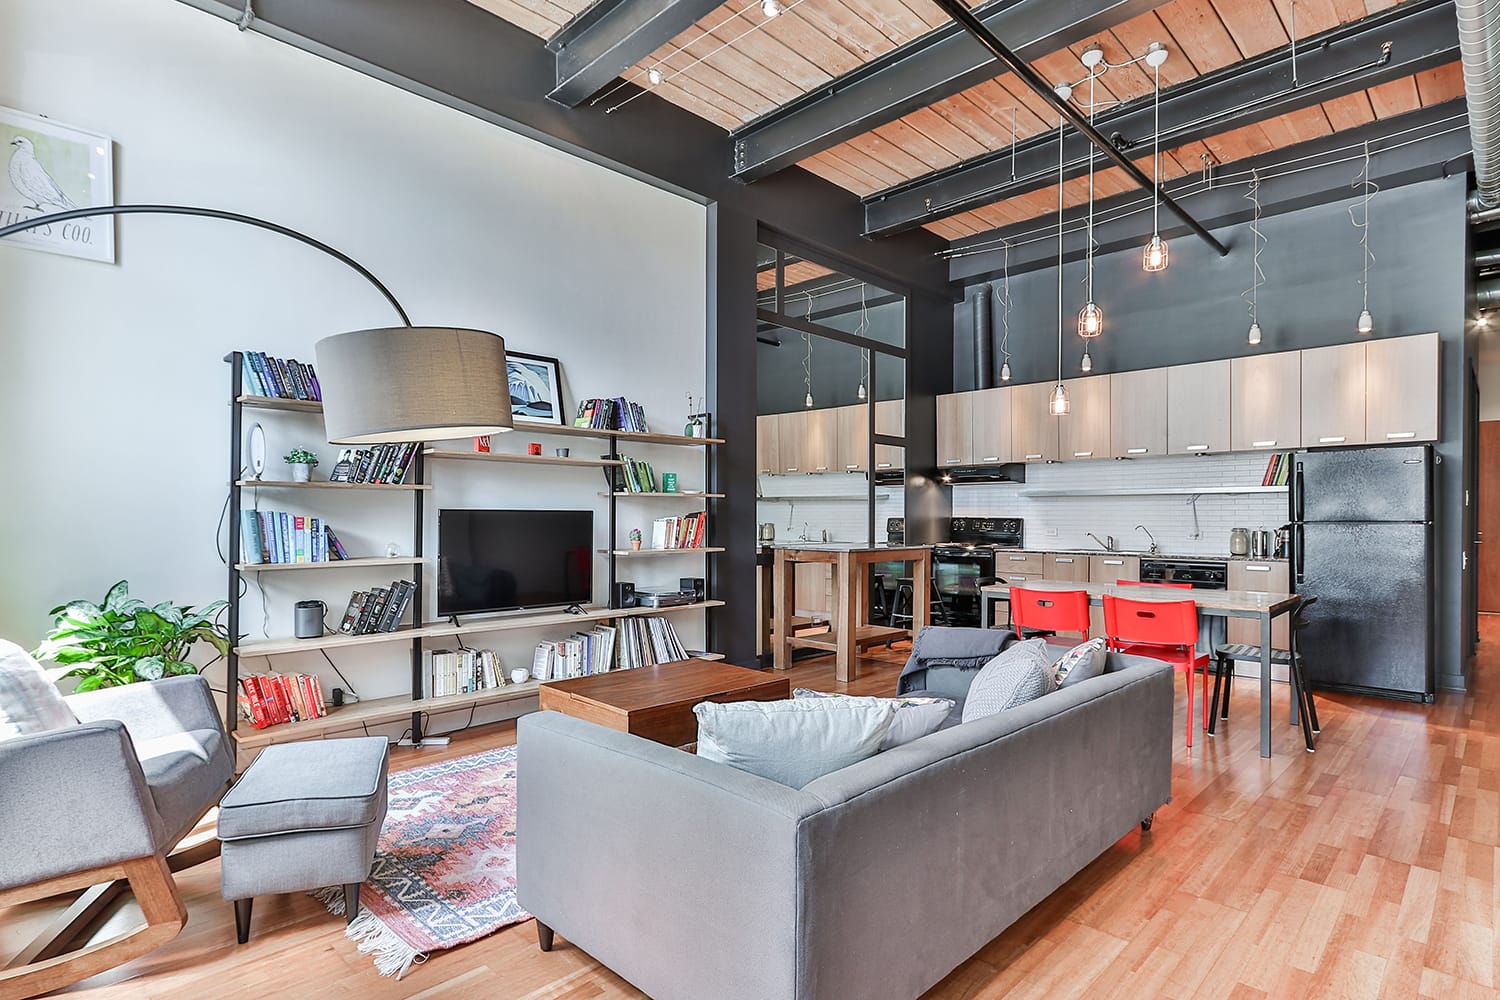 8 Quick Tips for Better Real Estate Photographs